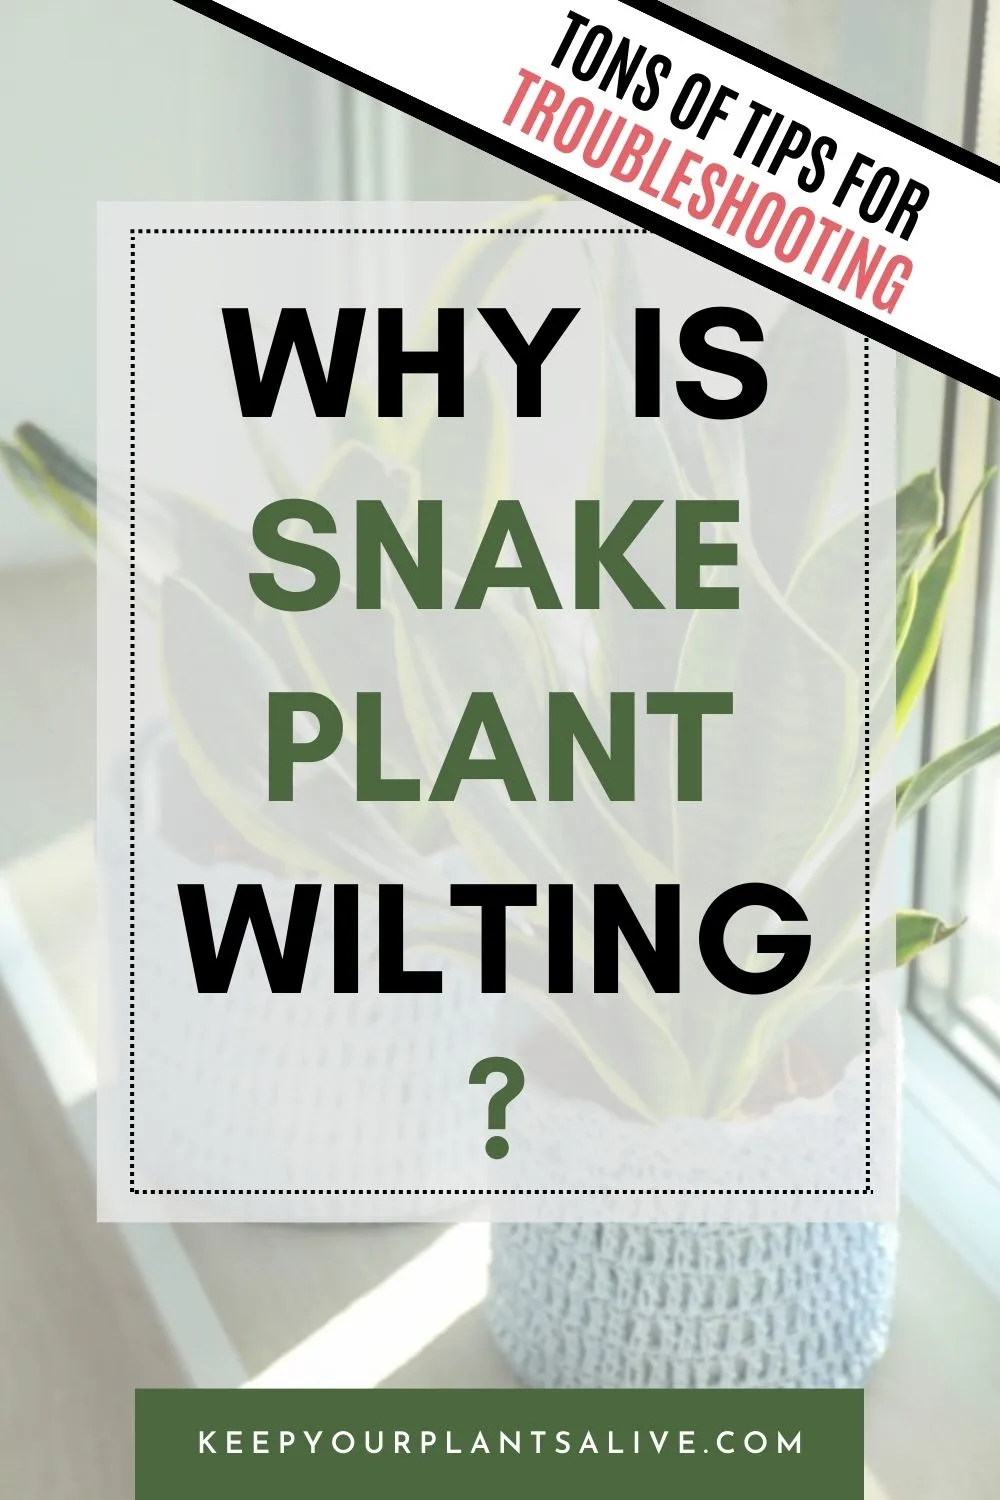 Why is snake plant wilting?